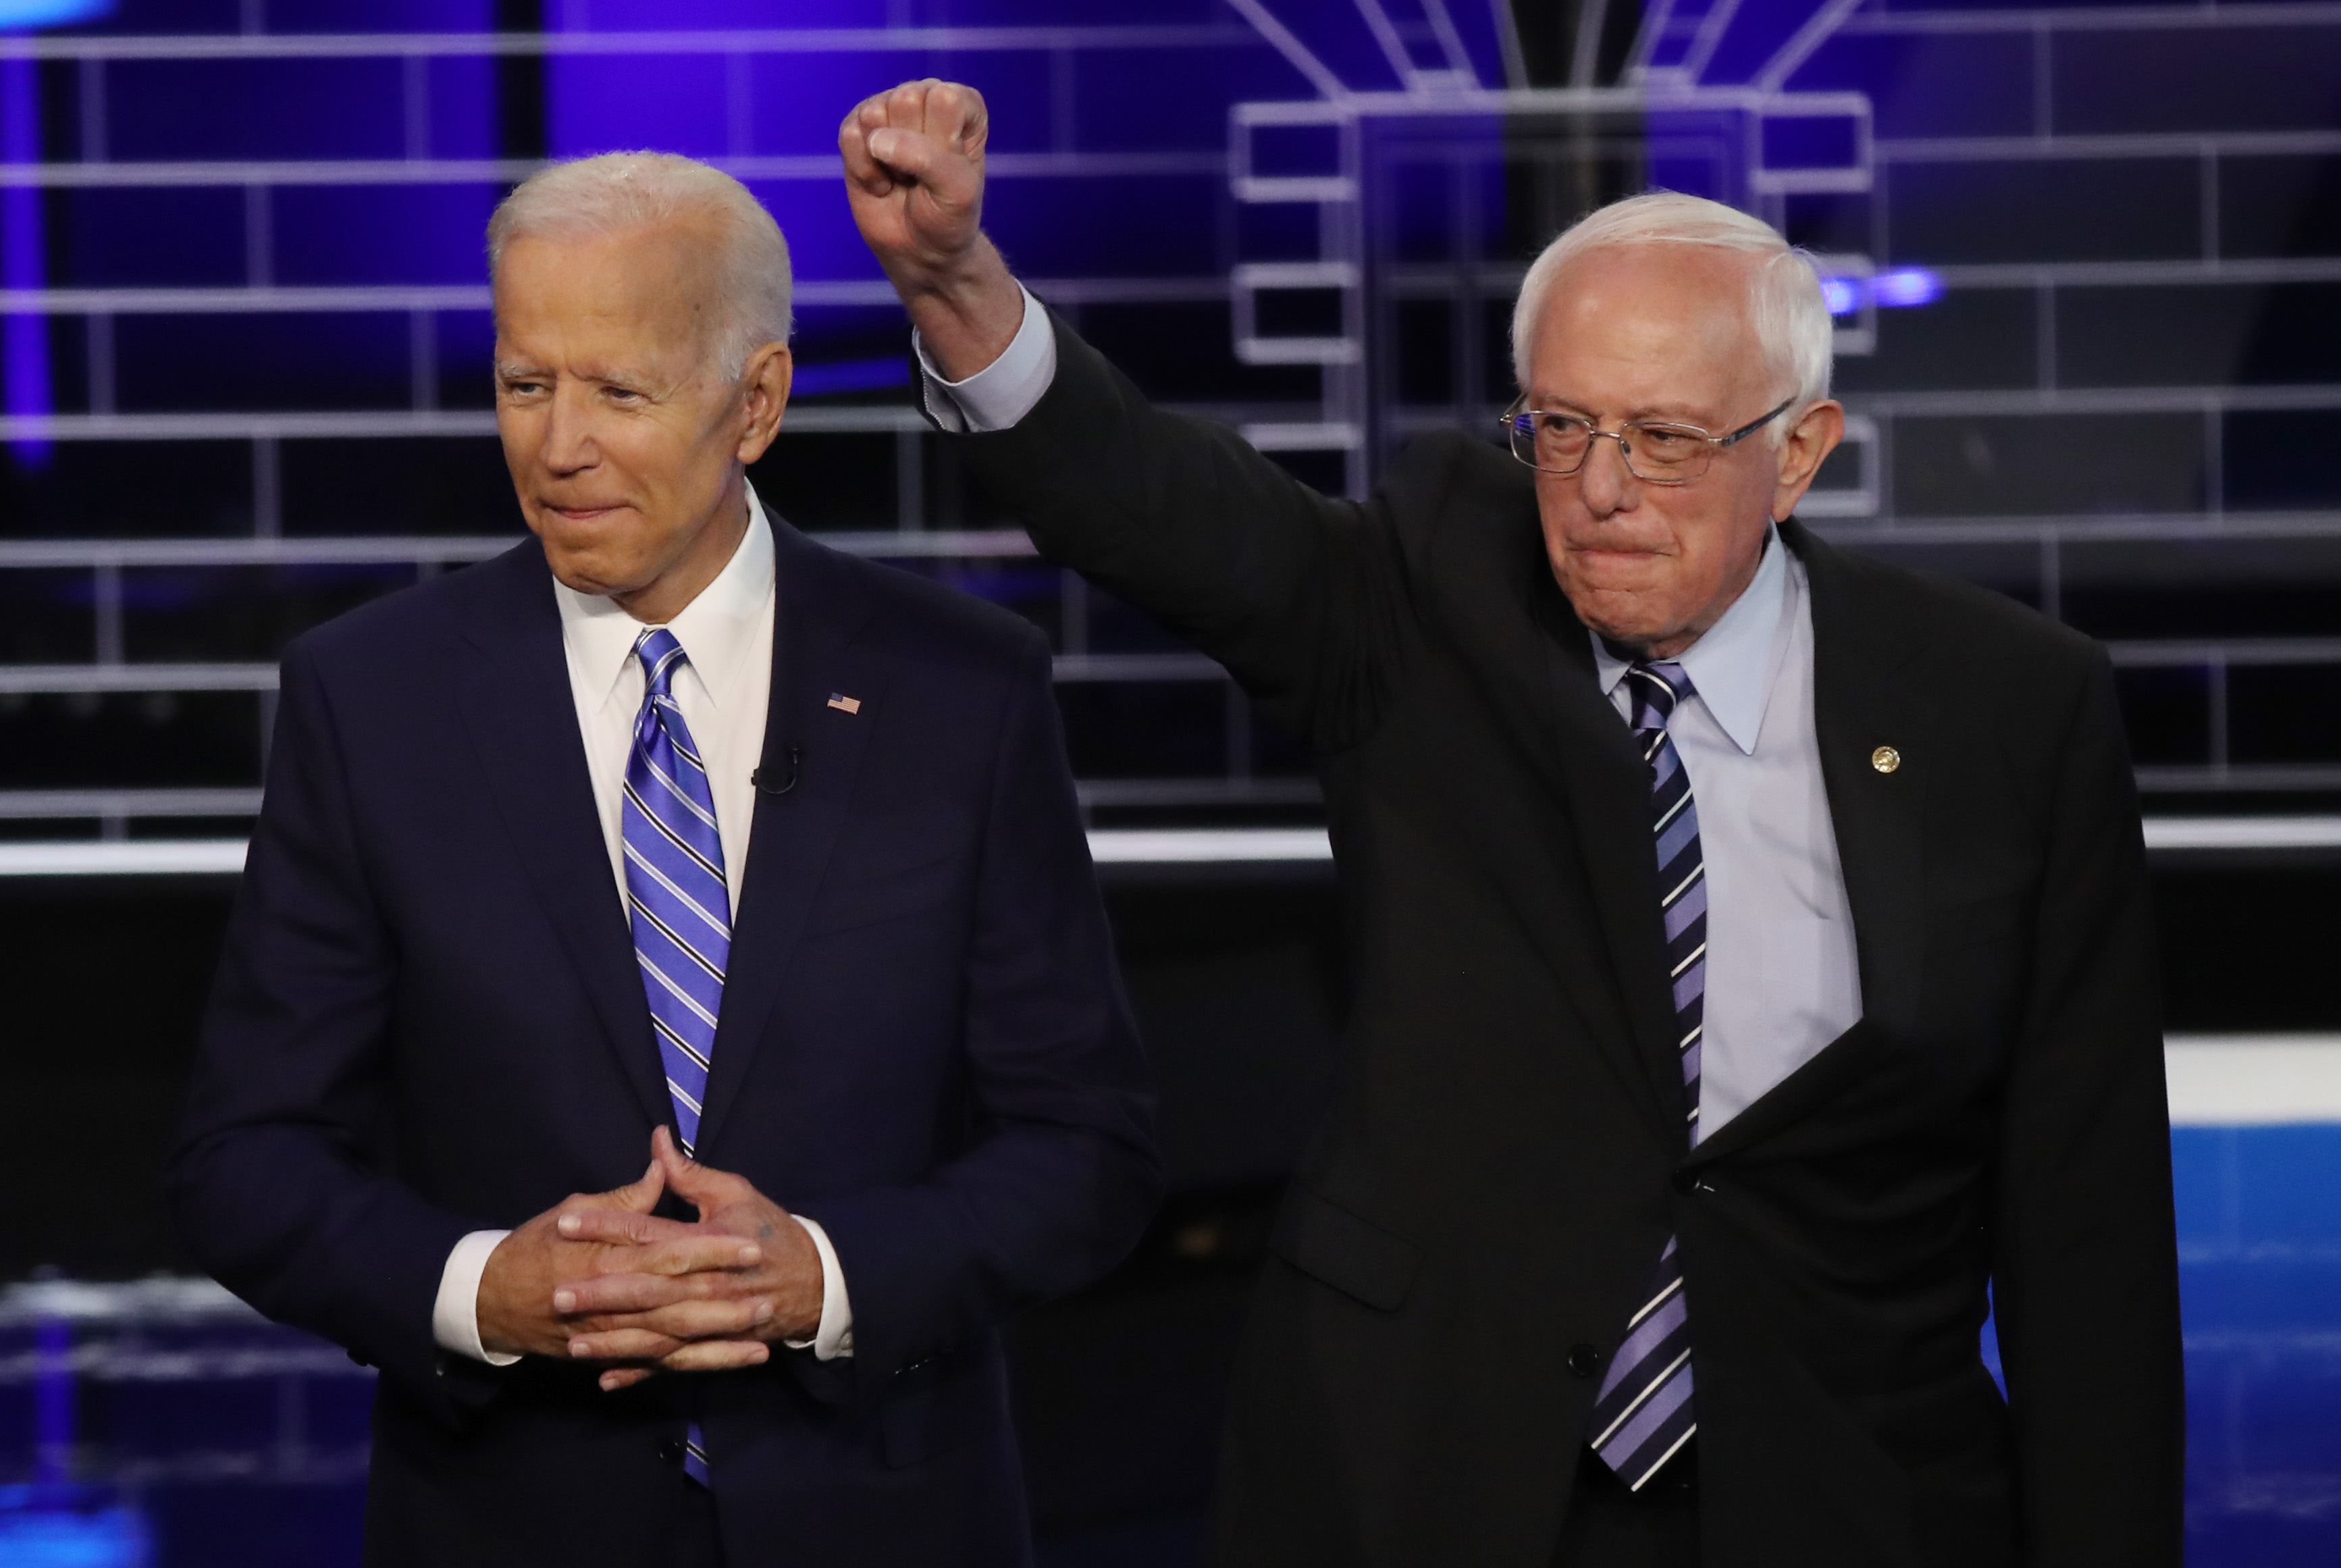 MIAMI, FLORIDA - JUNE 27: former Vice President Joe Biden and Sen. Bernie Sanders (I-VT) take the stage for the second night of the first Democratic presidential debate on June 27, 2019 in Miami, Florida. A field of 20 Democratic presidential candidates was split into two groups of 10 for the first debate of the 2020 election, taking place over two nights at Knight Concert Hall of the Adrienne Arsht Center for the Performing Arts of Miami-Dade County, hosted by NBC News, MSNBC, and Telemundo. (Photo by Drew Angerer/Getty Images)